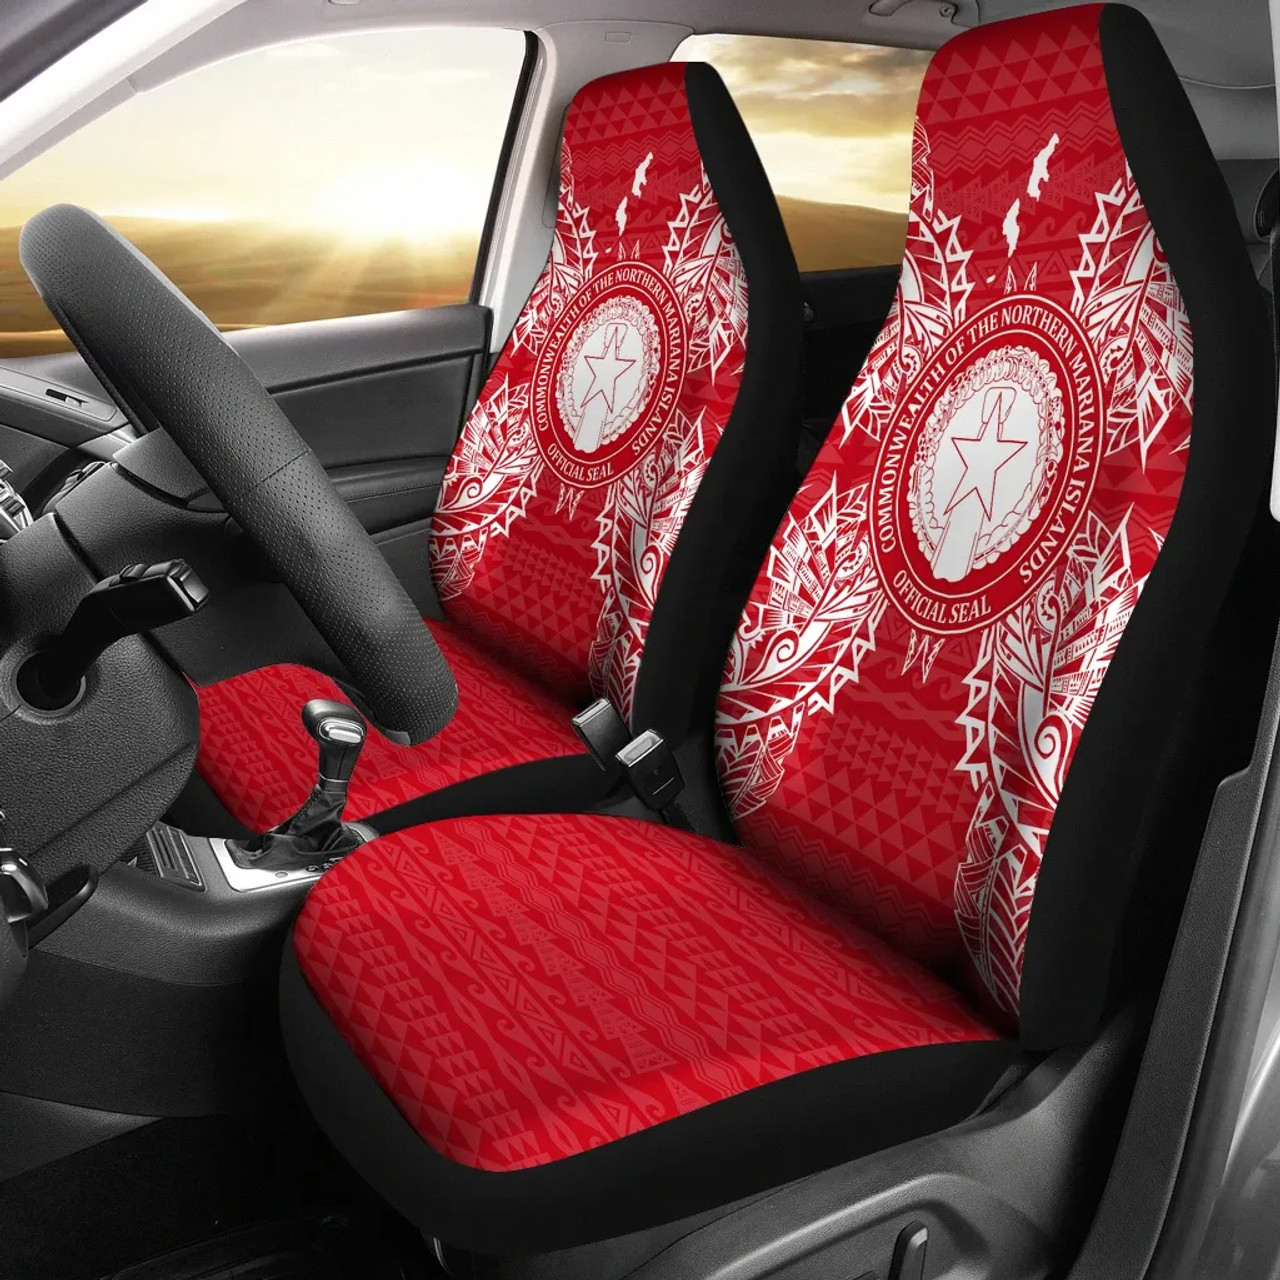 Northern Mariana Islands Car Seat Cover - CNMI Seal Map Red White